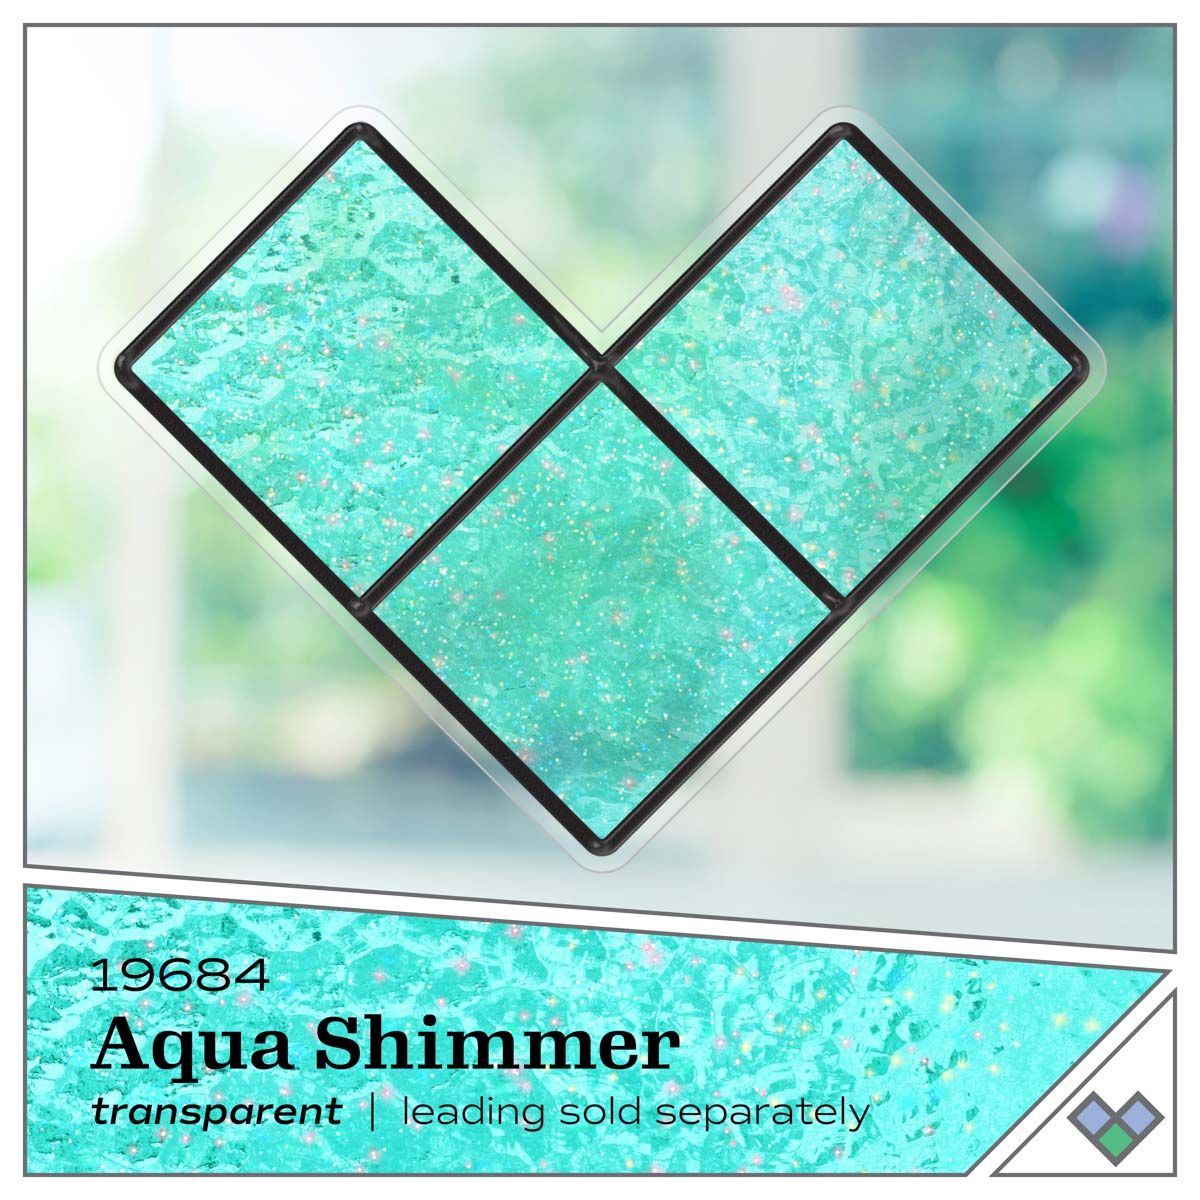 Gallery Glass ® Shimmer™ Stained Glass Effect Paint - Aqua, 2 oz. - 19684